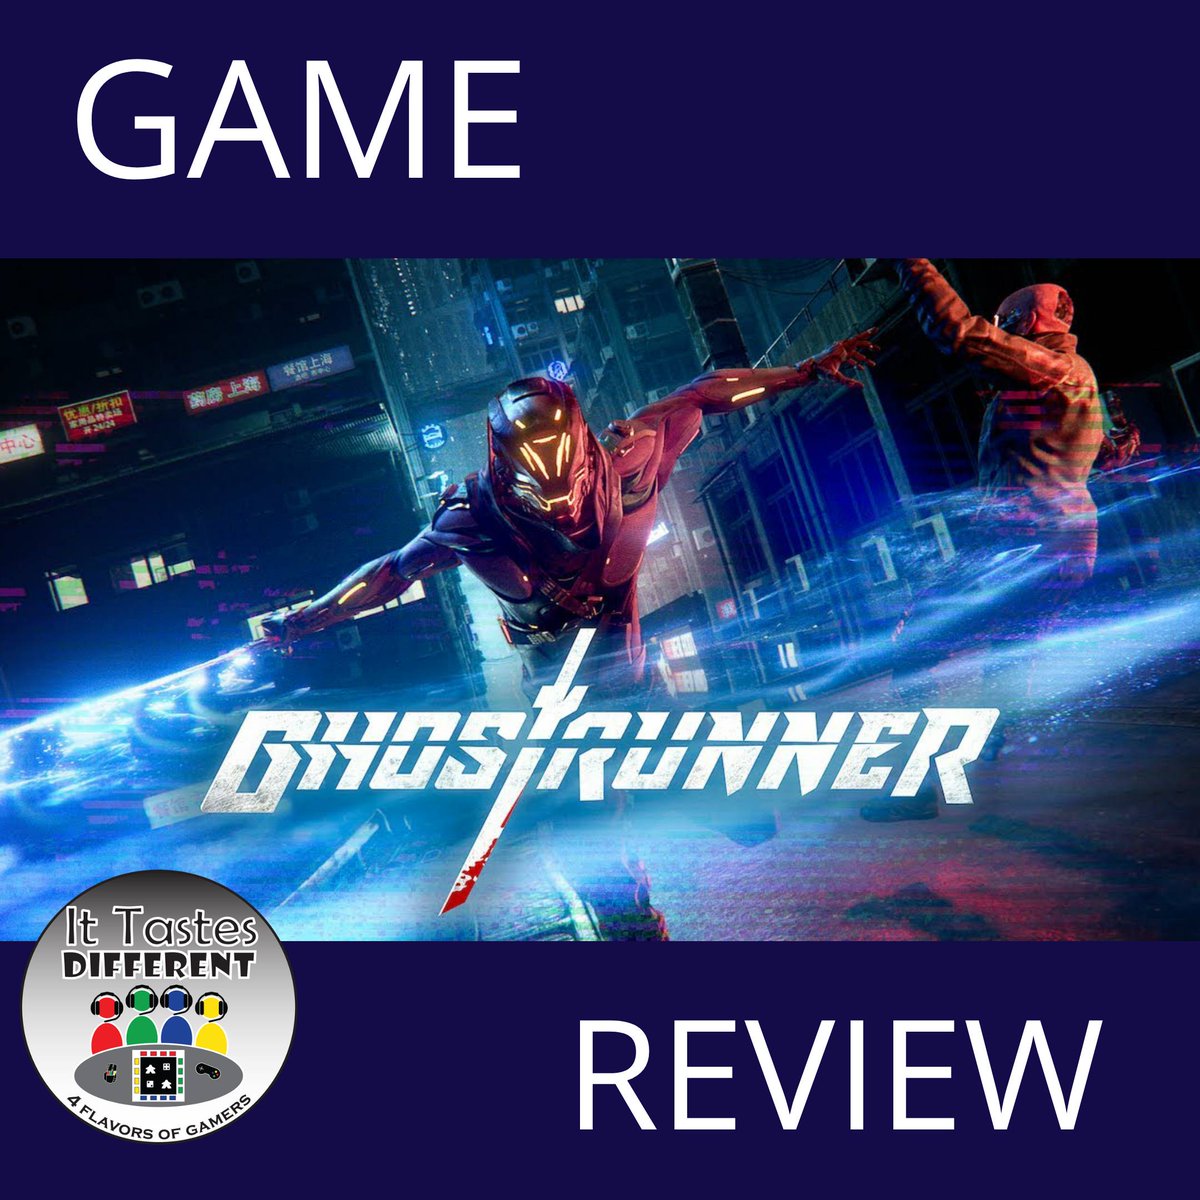 New episode is live - Game review of Ghostrunner. Check it out!

linktr.ee/itdpodcast

#ghostrunner #onemorelevel #3drealms #slipgateironworks #allingames #505games #nintendo #playstation #xbox #pcgaming #gamereview #gamingpodcast #gamerlife #gamer #gaming #videogames